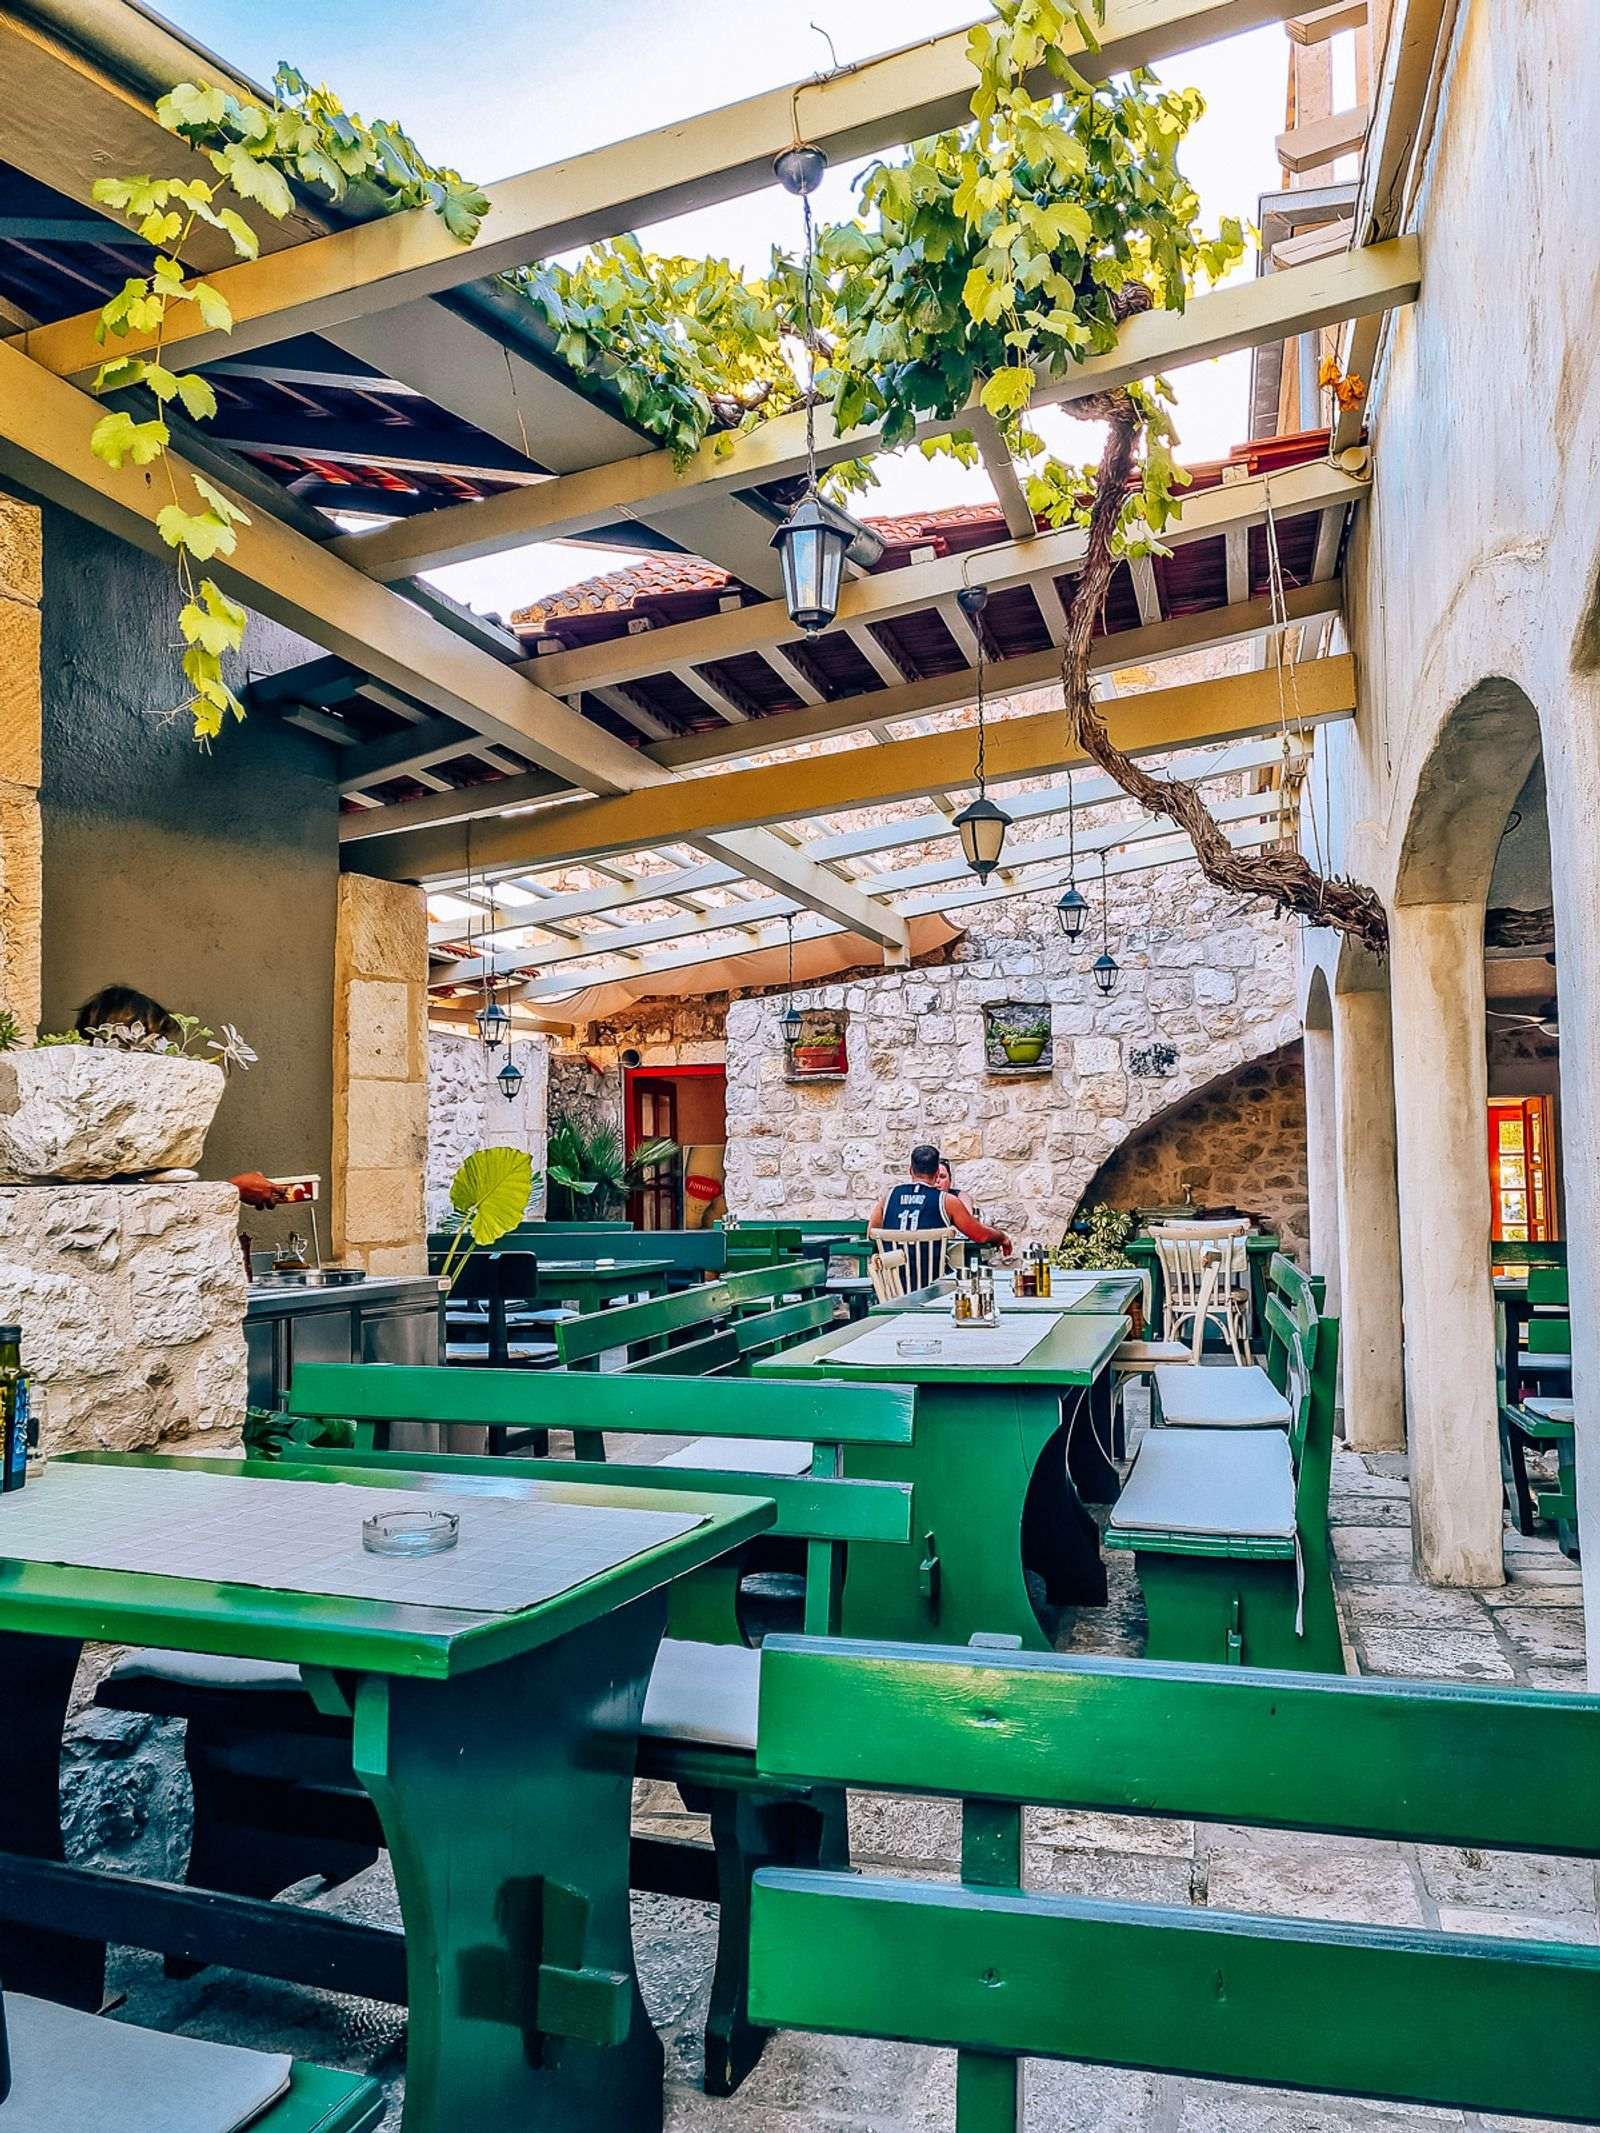 A quaint stone courtyard with a terrace and vines growing over the green wooden restaurant tables and benches